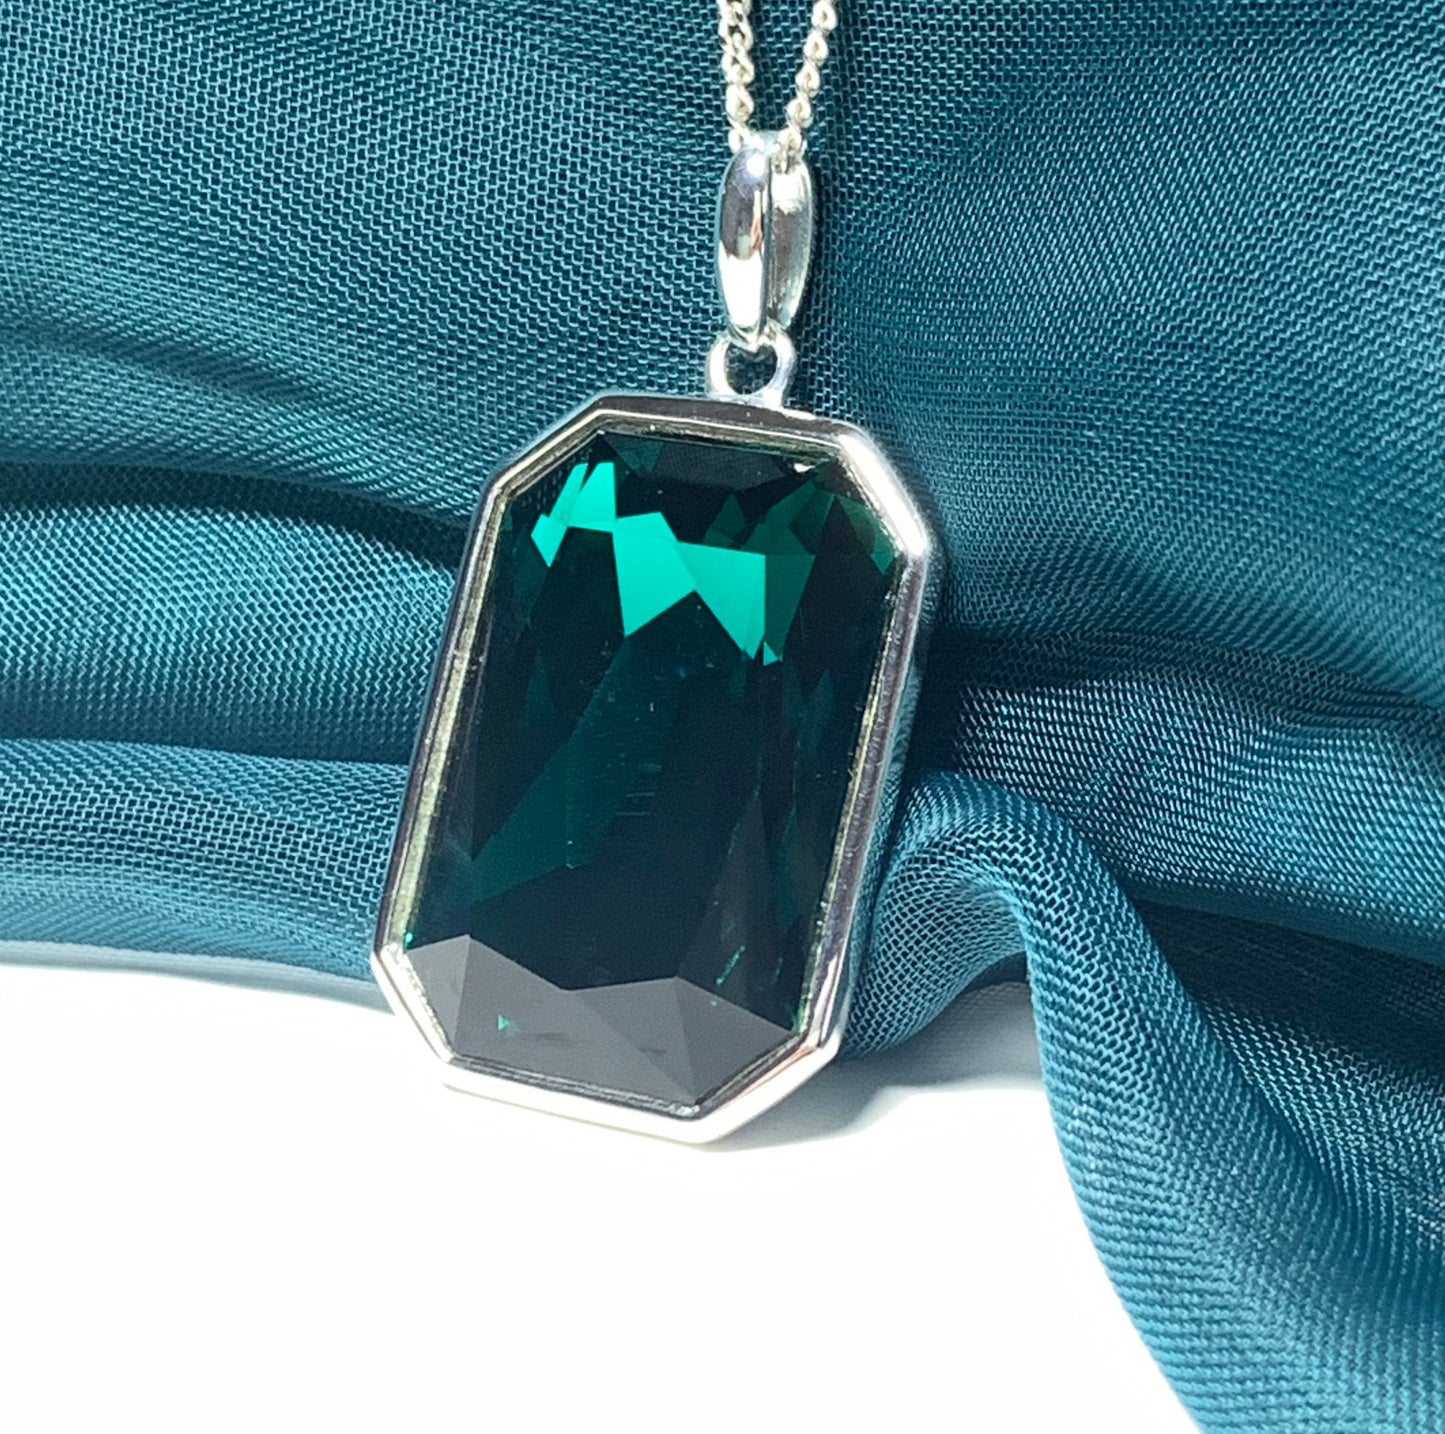 Large emerald green crystal octagonal necklace